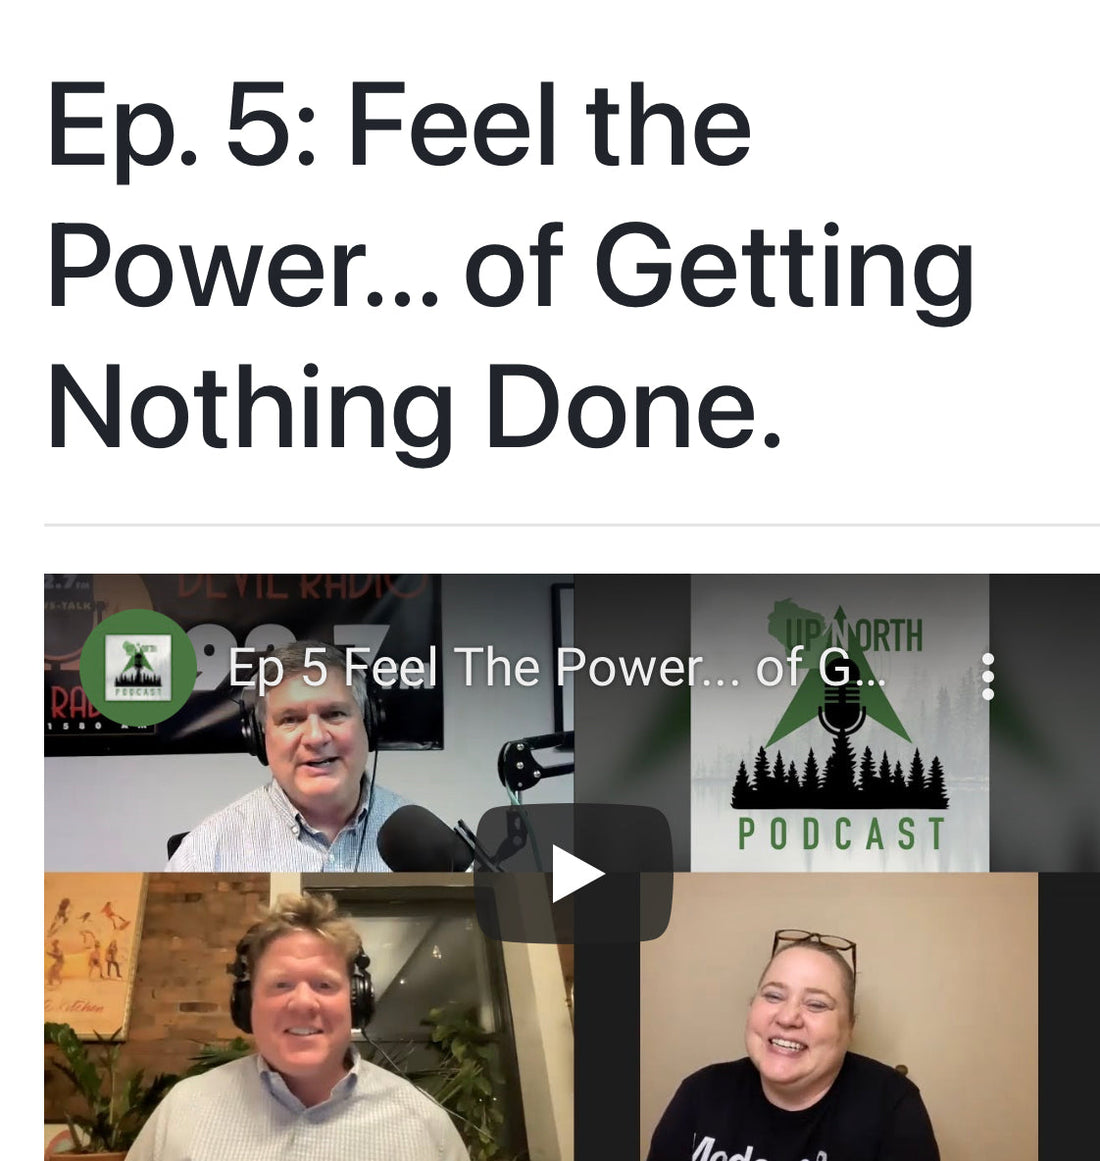 Episode 5: Feel the Power...of Getting Nothing Done